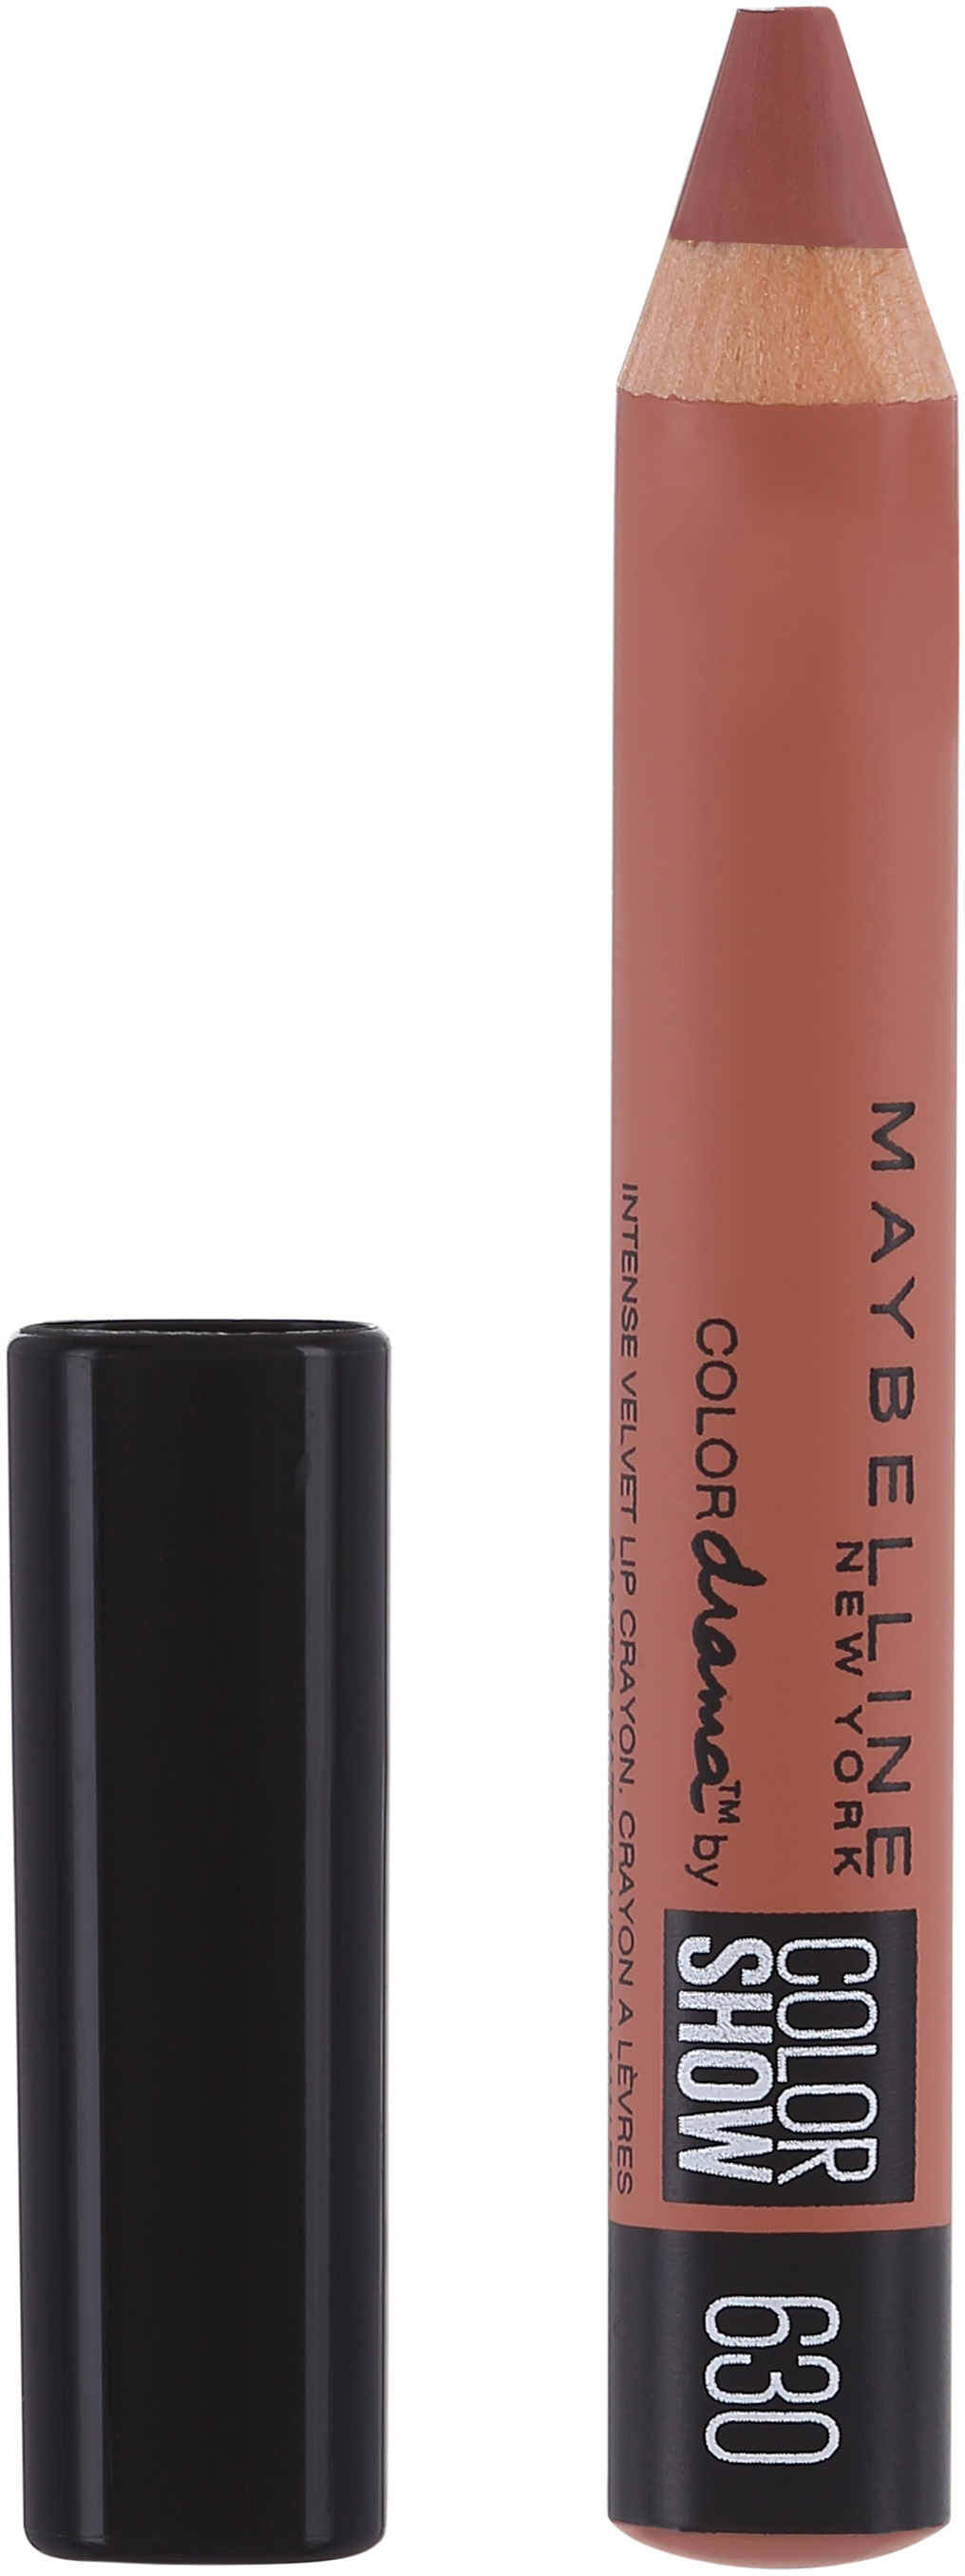 Maybelline Color Drama Lips 630 Nude Perfection